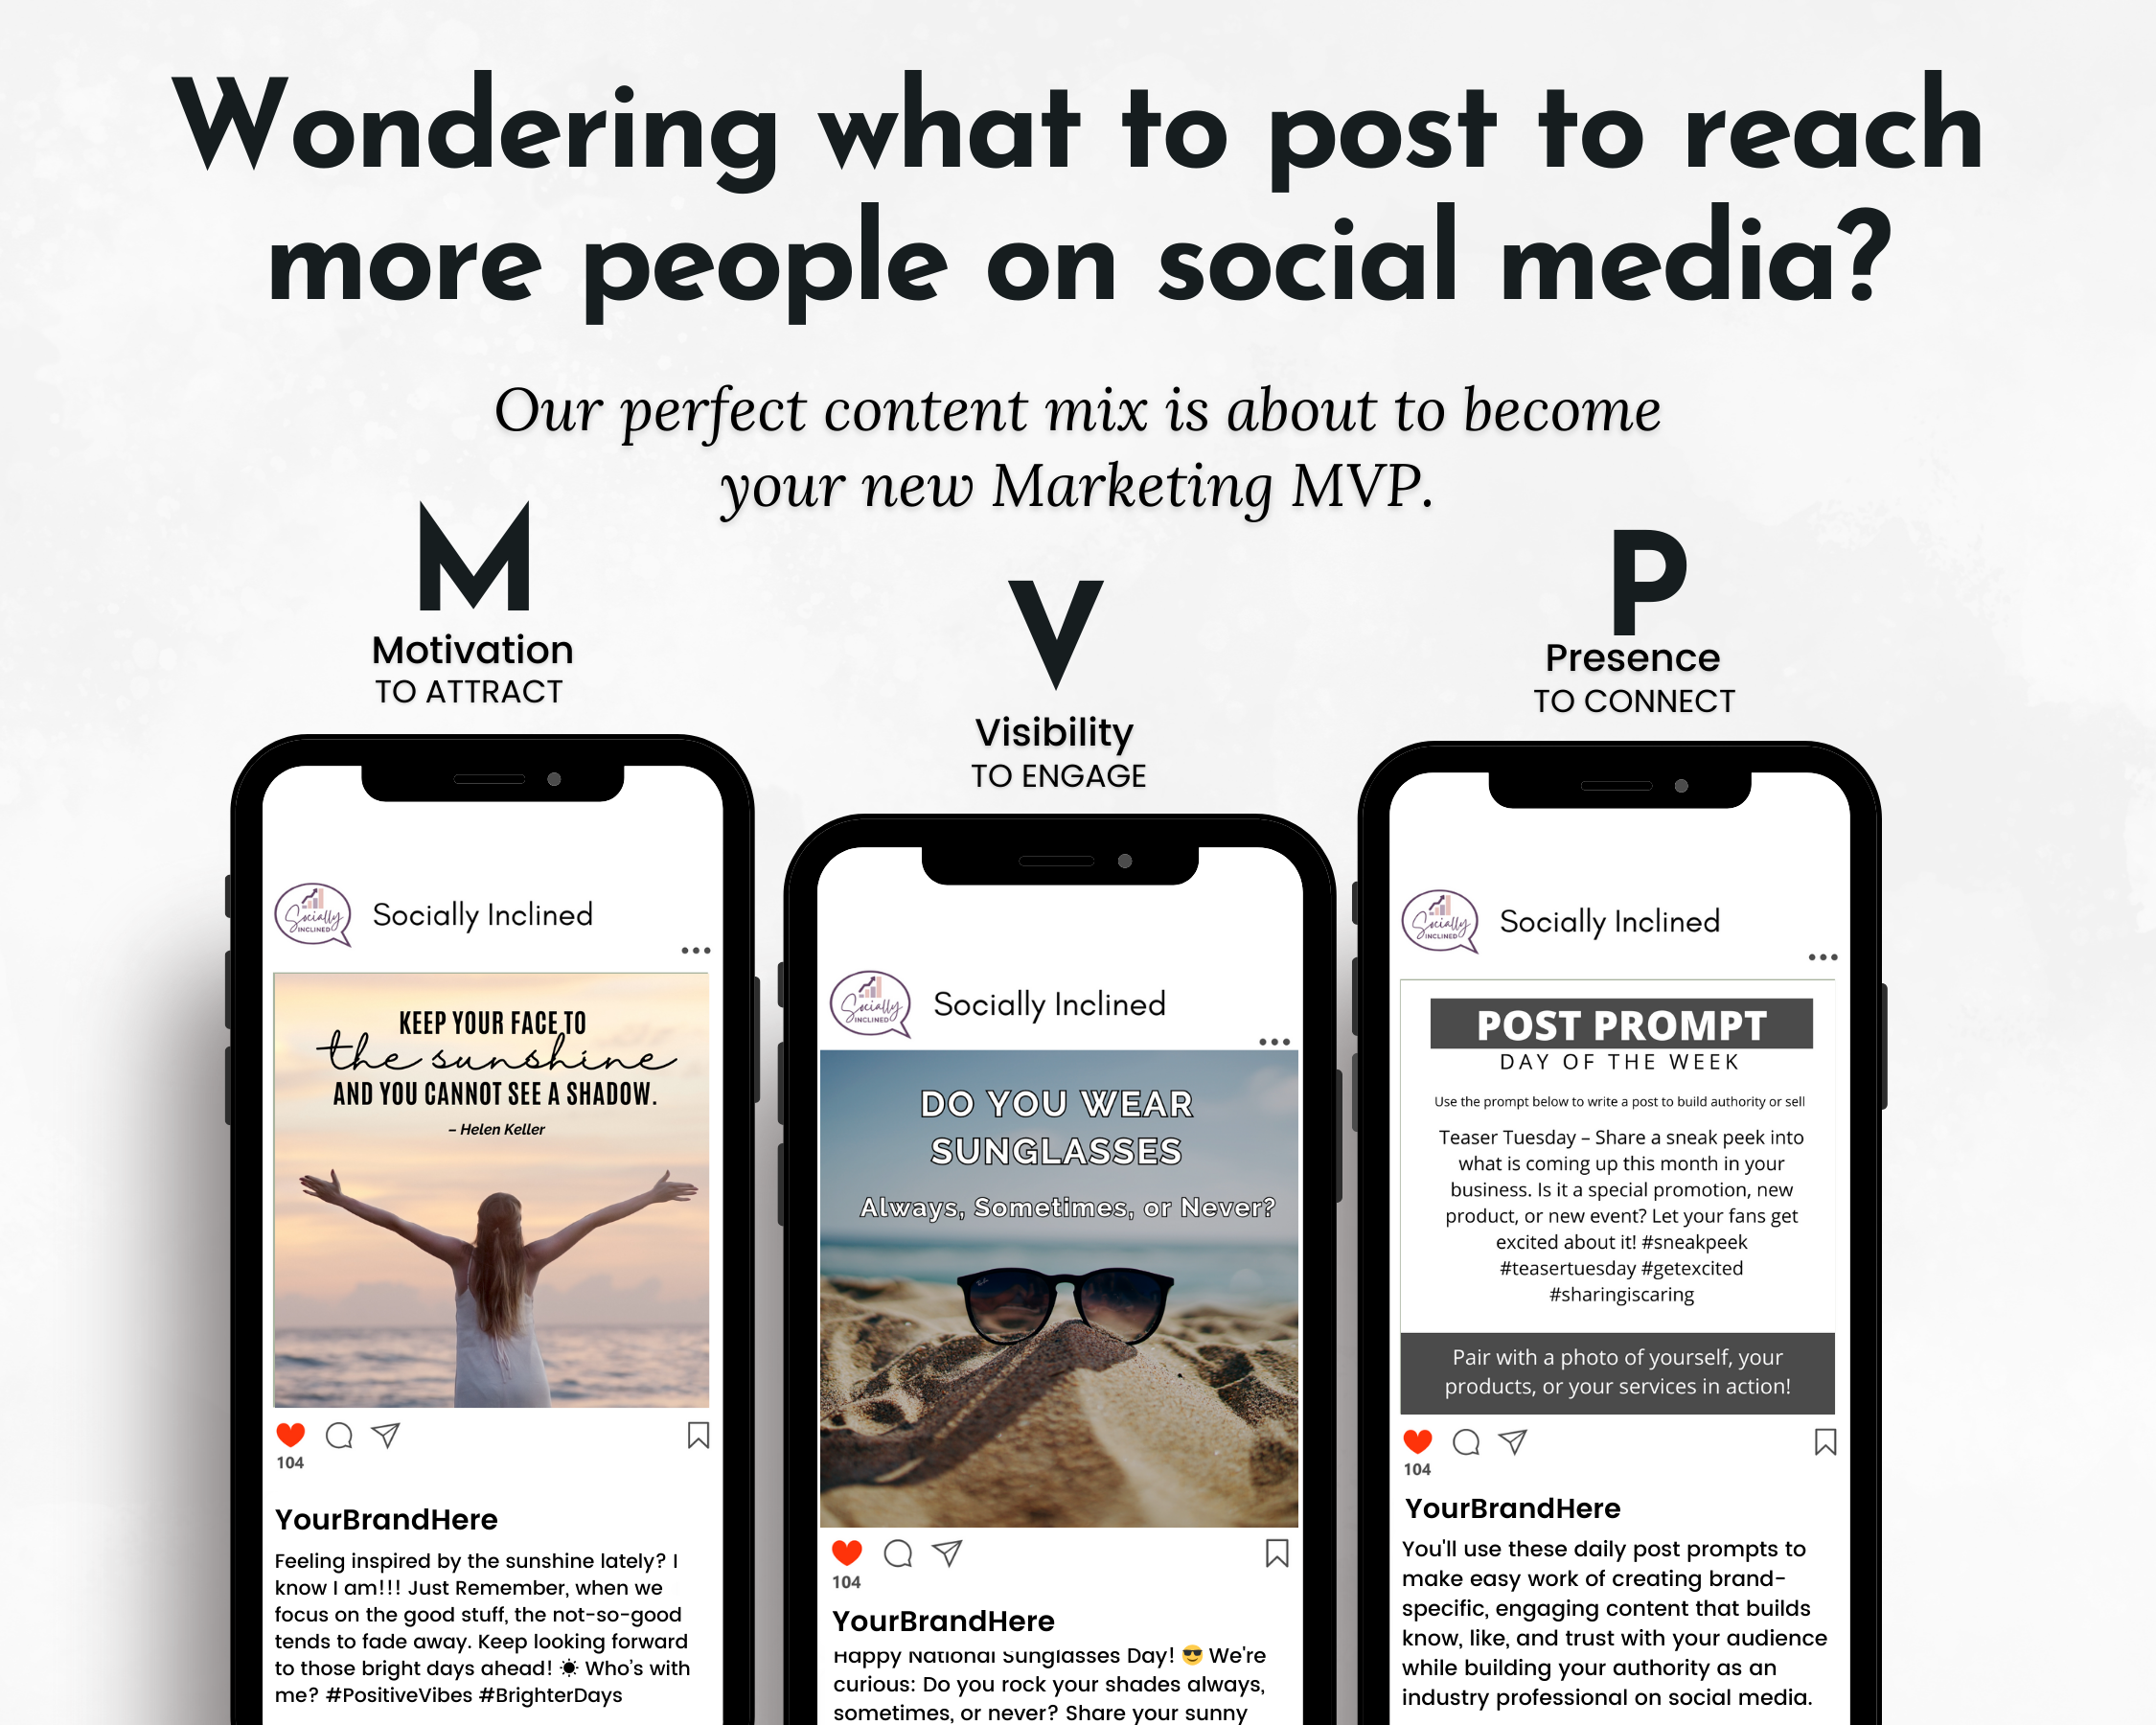 Three Get Socially Inclined smartphones displaying social media marketing strategies with texts and images about attracting, visibility, and presence, titled "Your Social Plan.